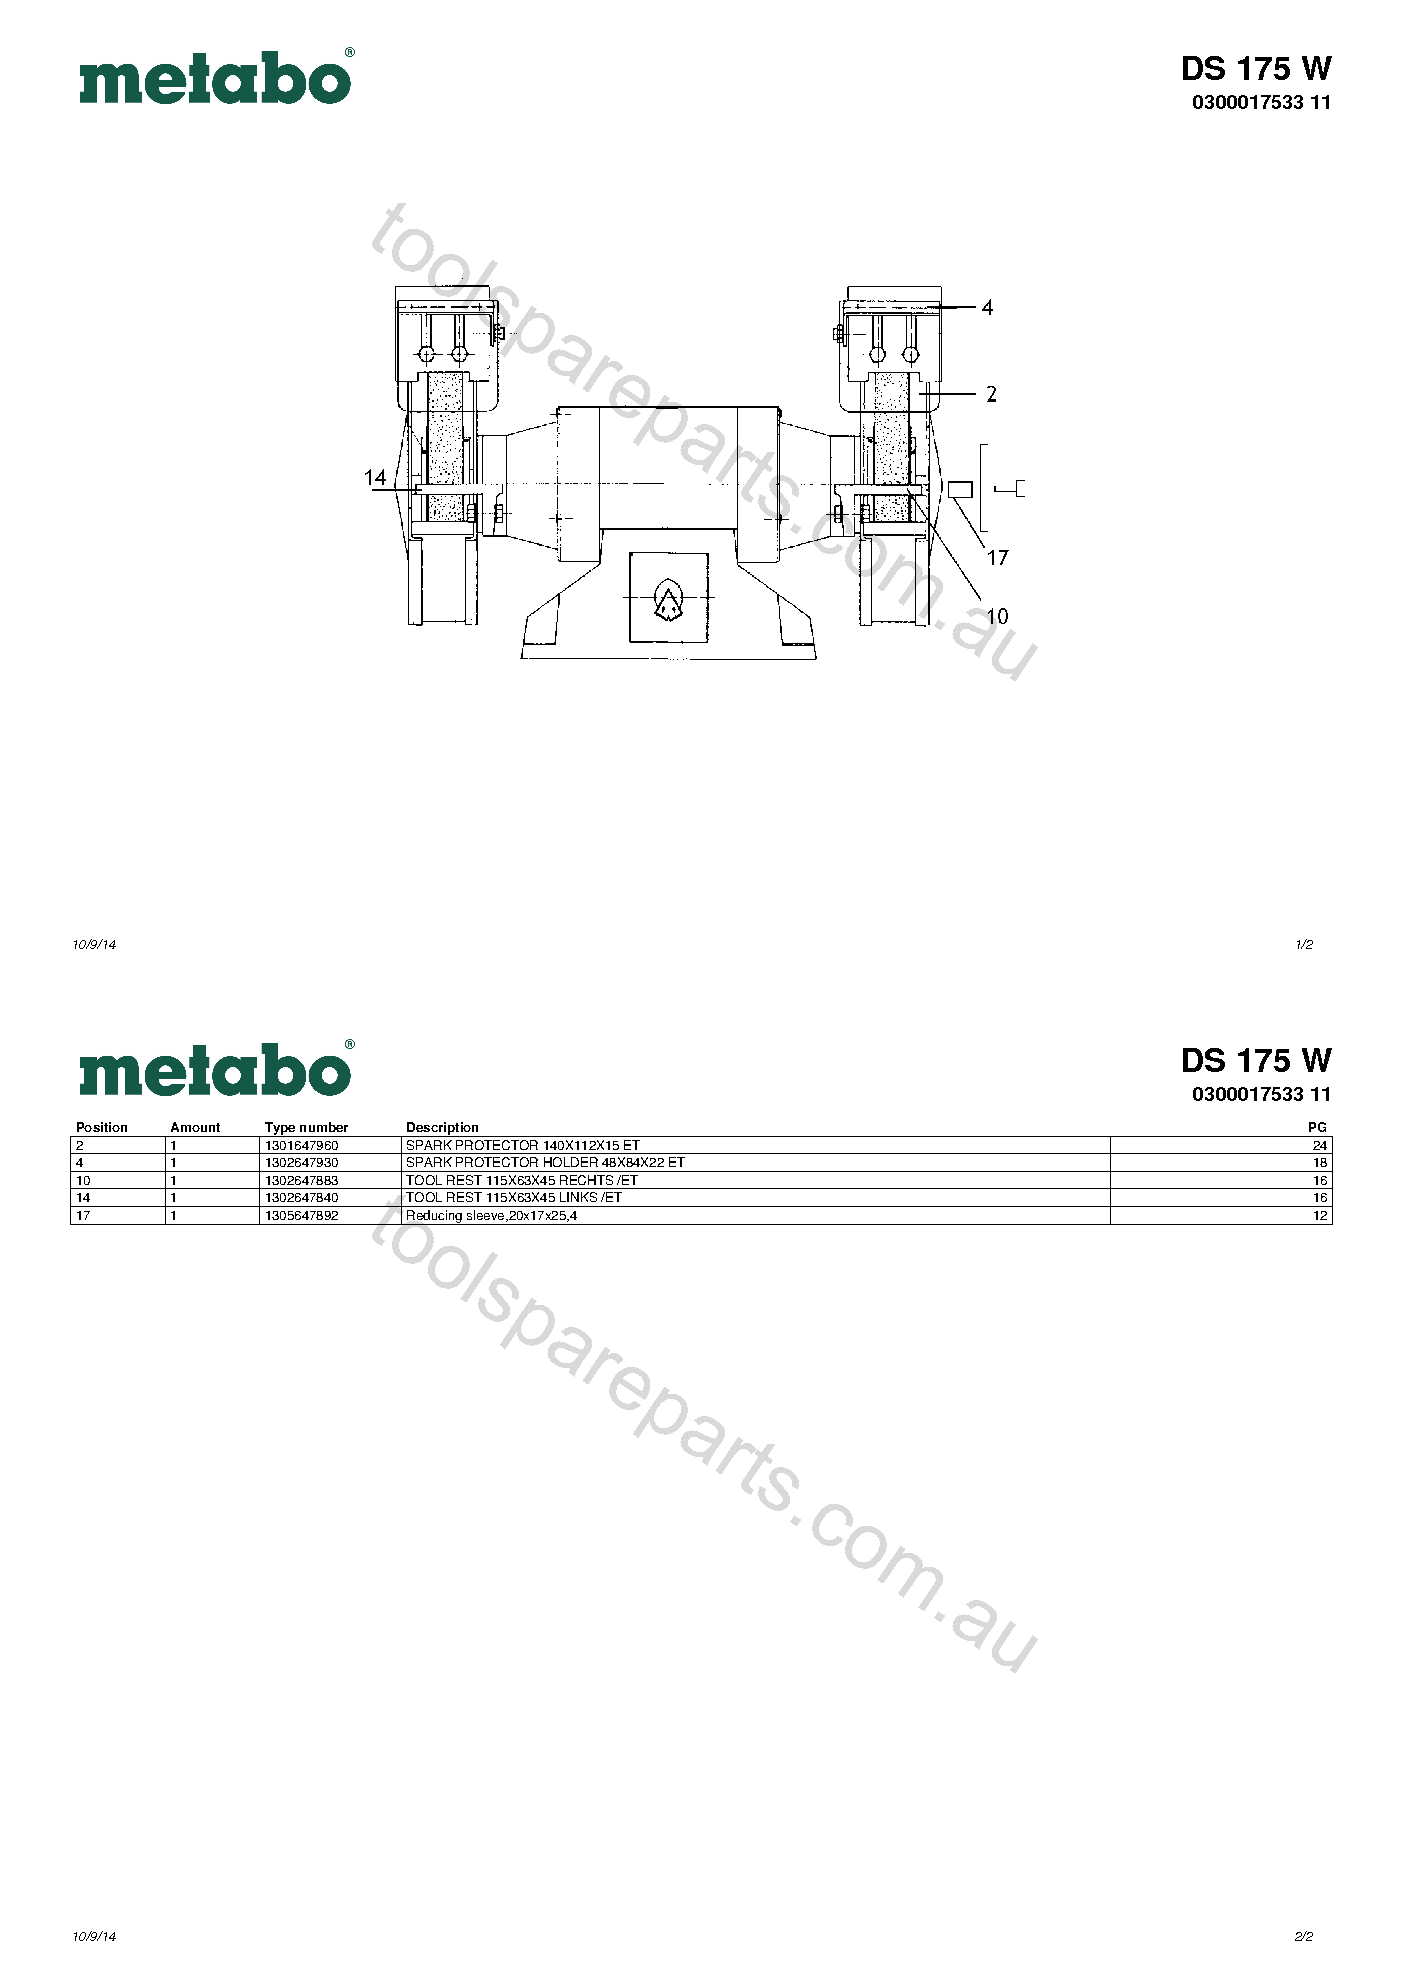 Metabo DS 175 W 0300017533 11  Diagram 1